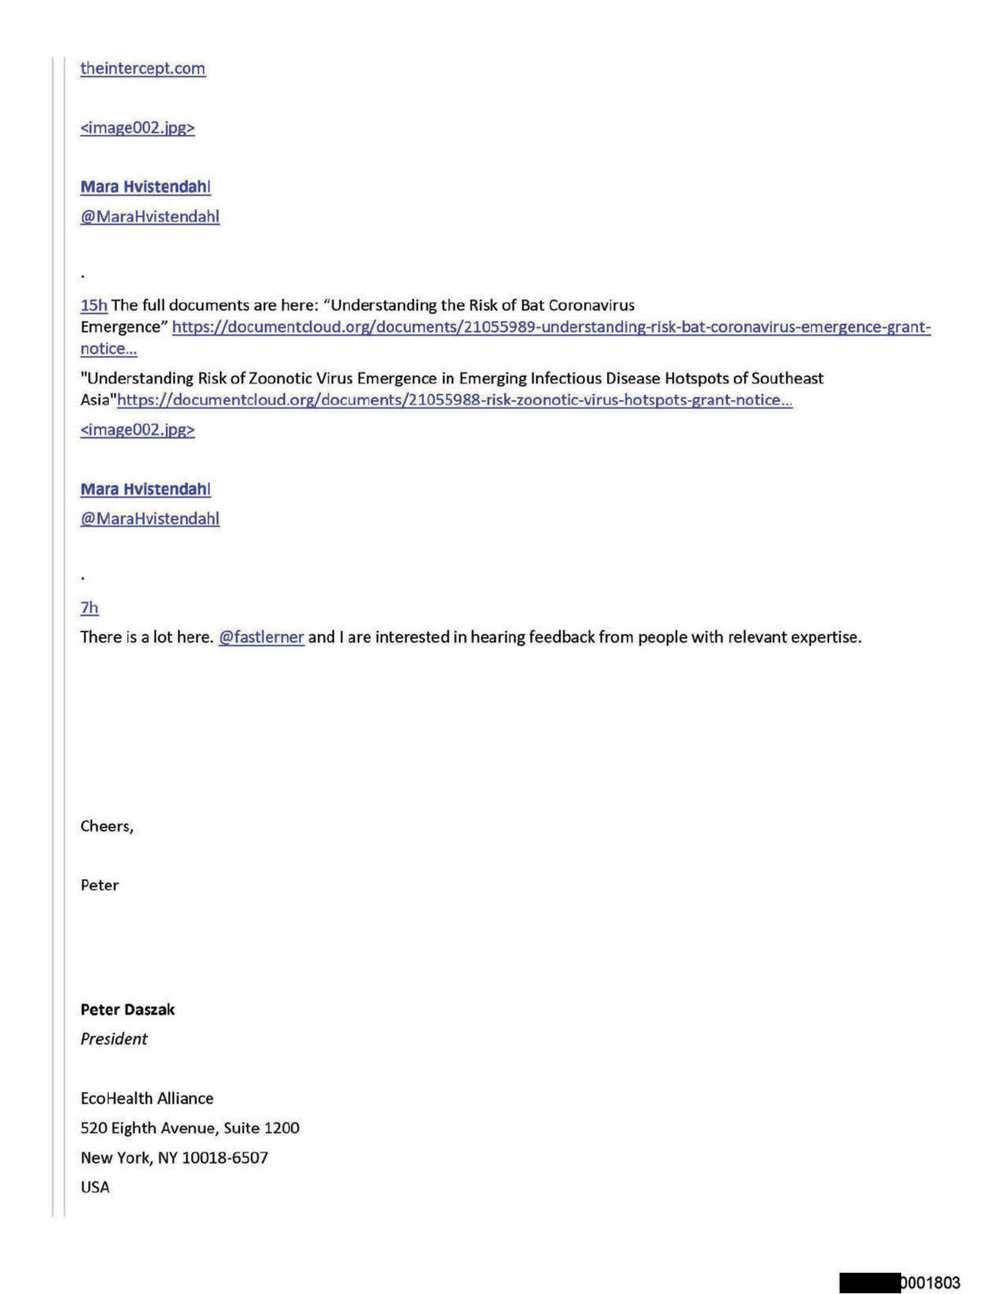 Page 30 from David Morens NIH Emails Redacted